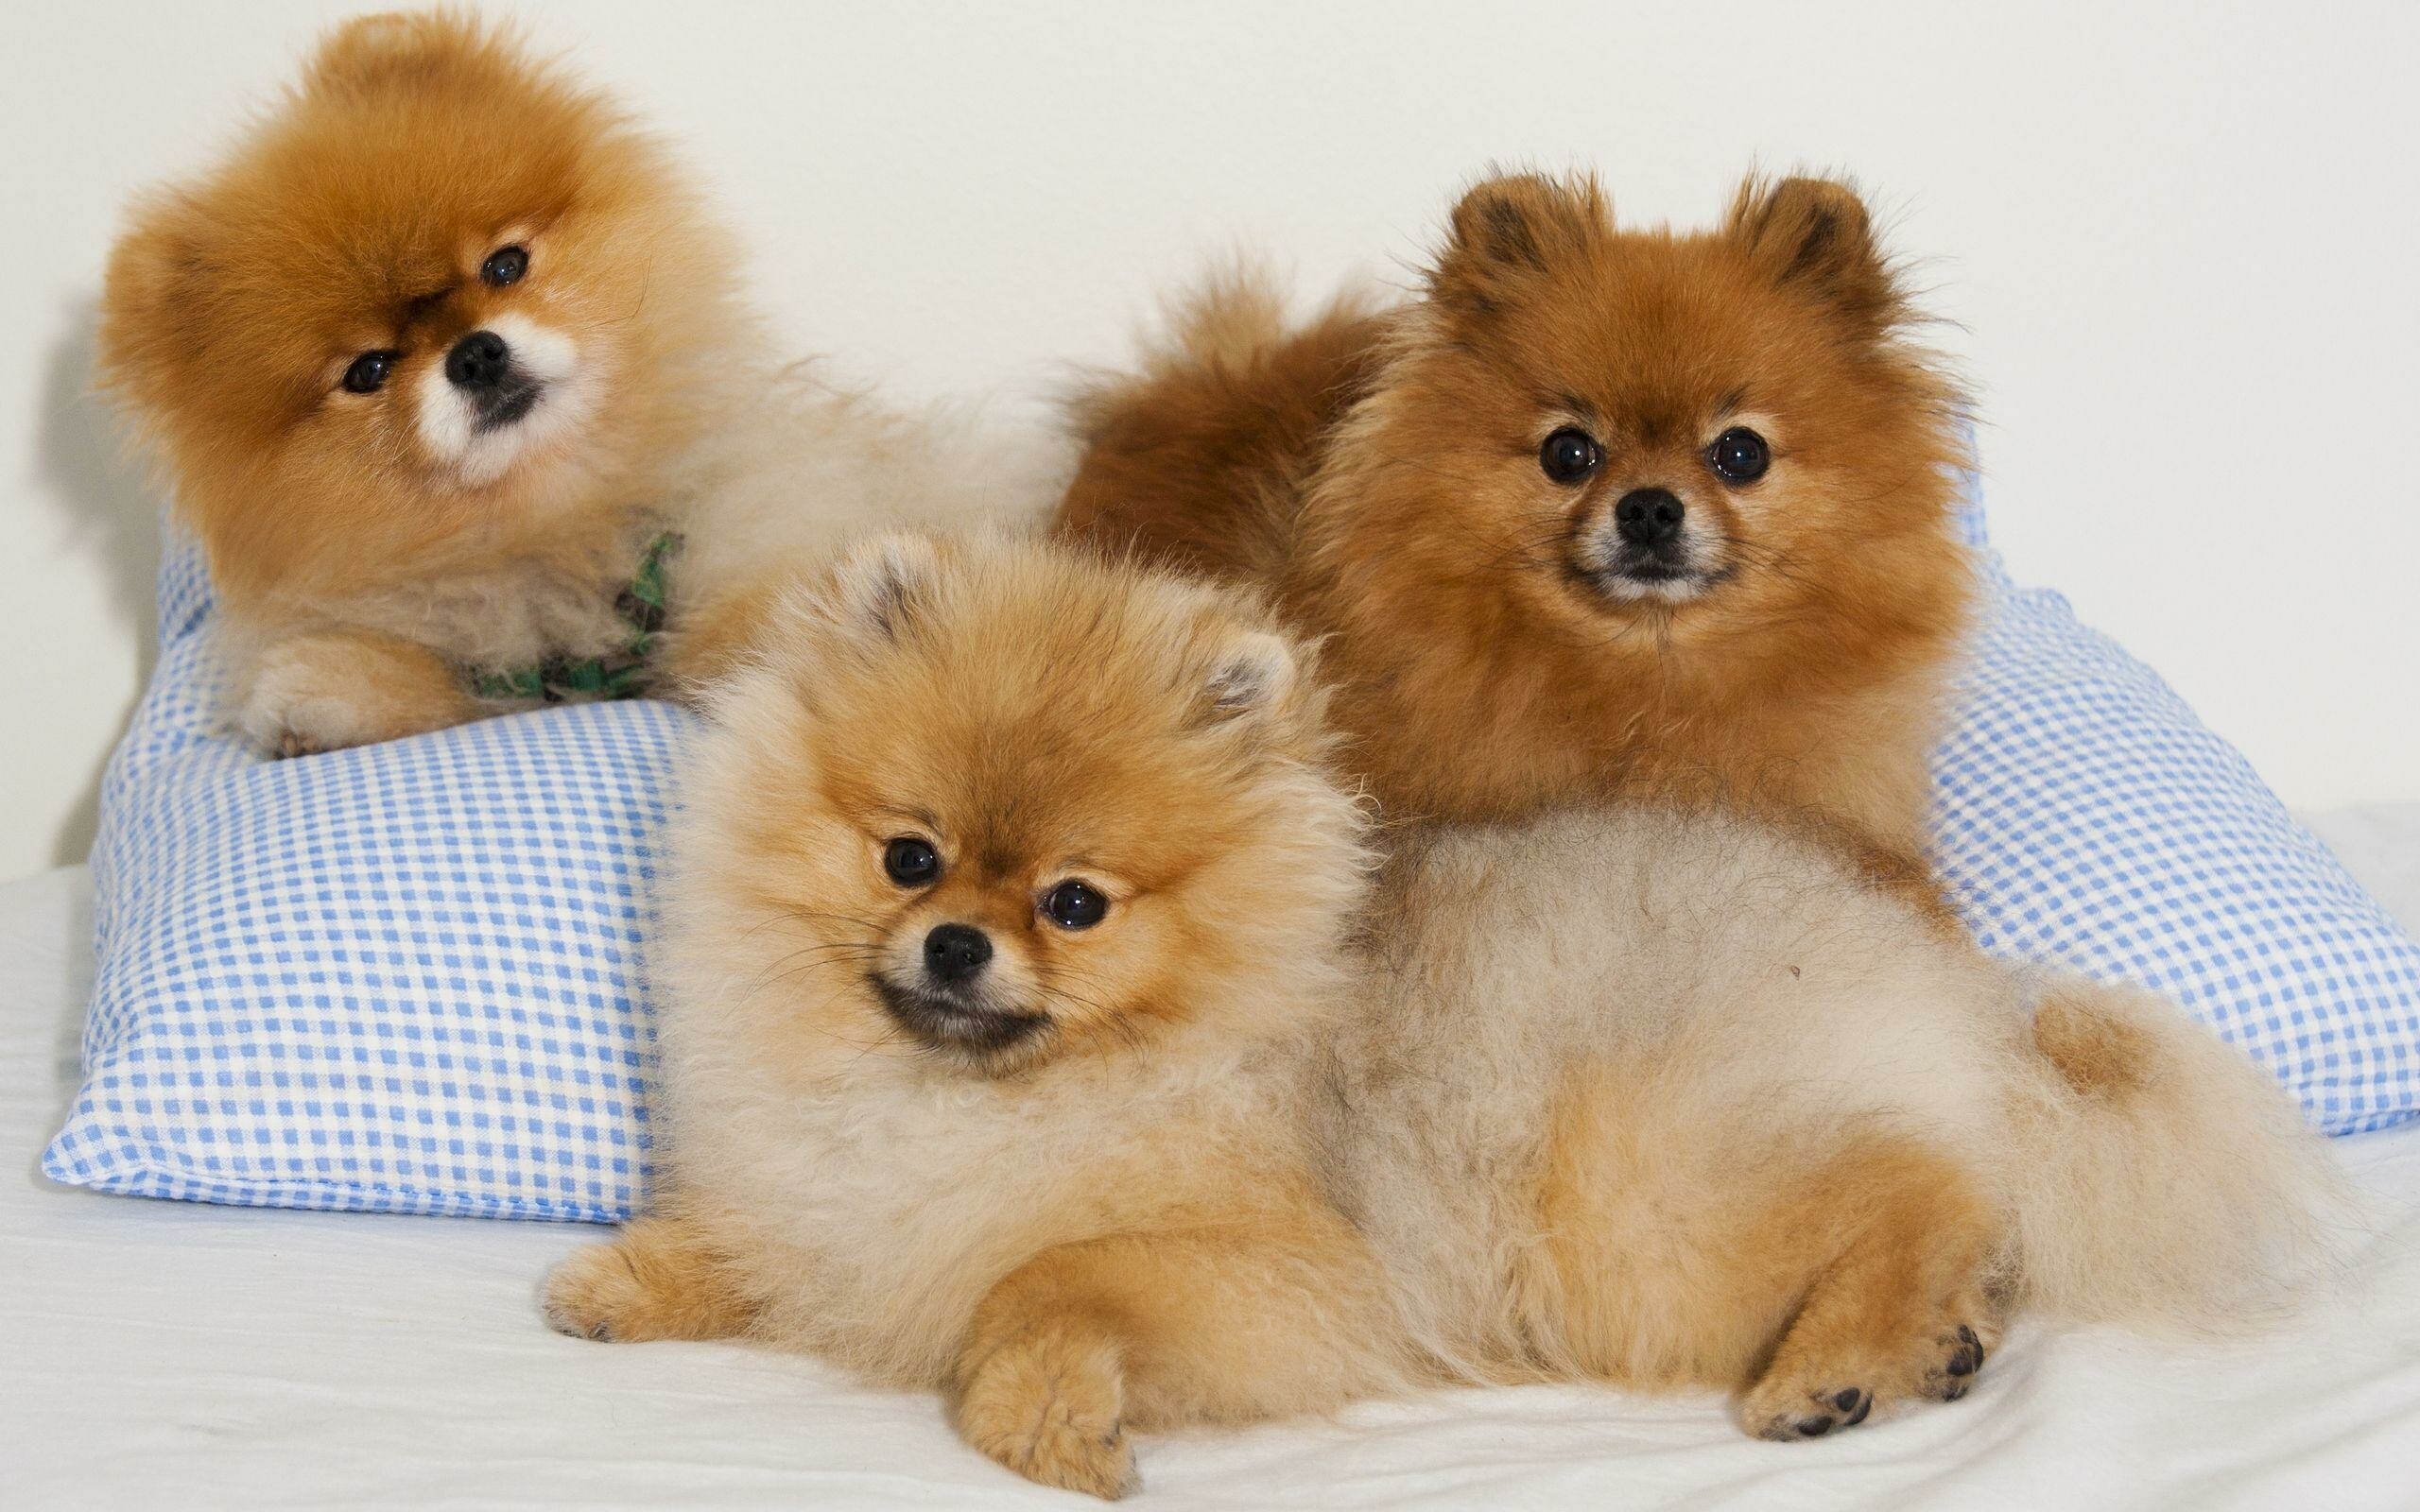 Pomeranian: Queen Victoria adopted a small red dog in 1888, Spitz. 2560x1600 HD Wallpaper.